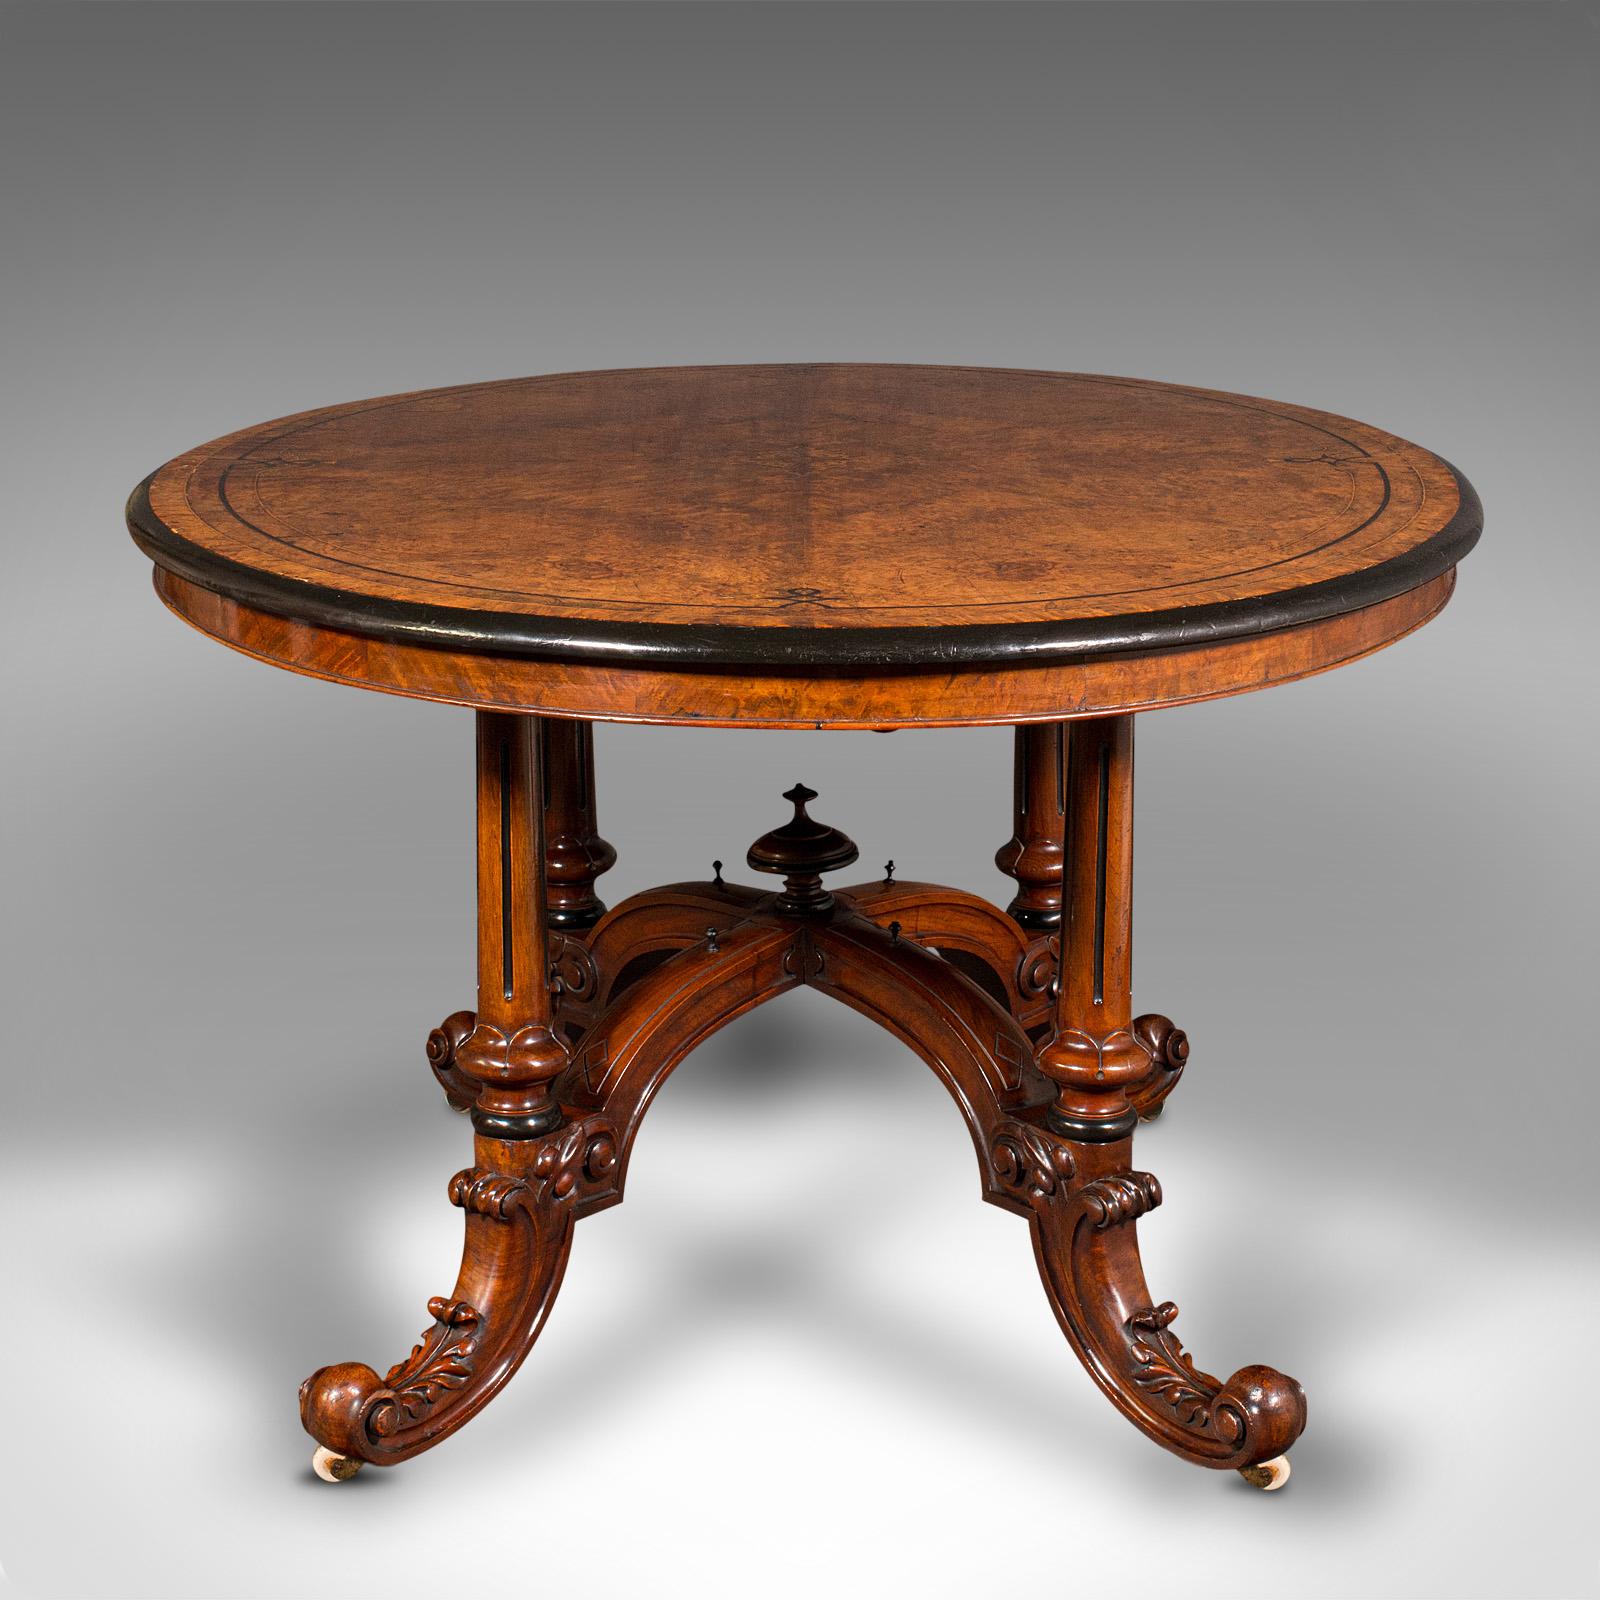 Antique Oval Looe Table, English, Walnut, 4 Seat, Centrepiece, Early Victorian In Good Condition For Sale In Hele, Devon, GB